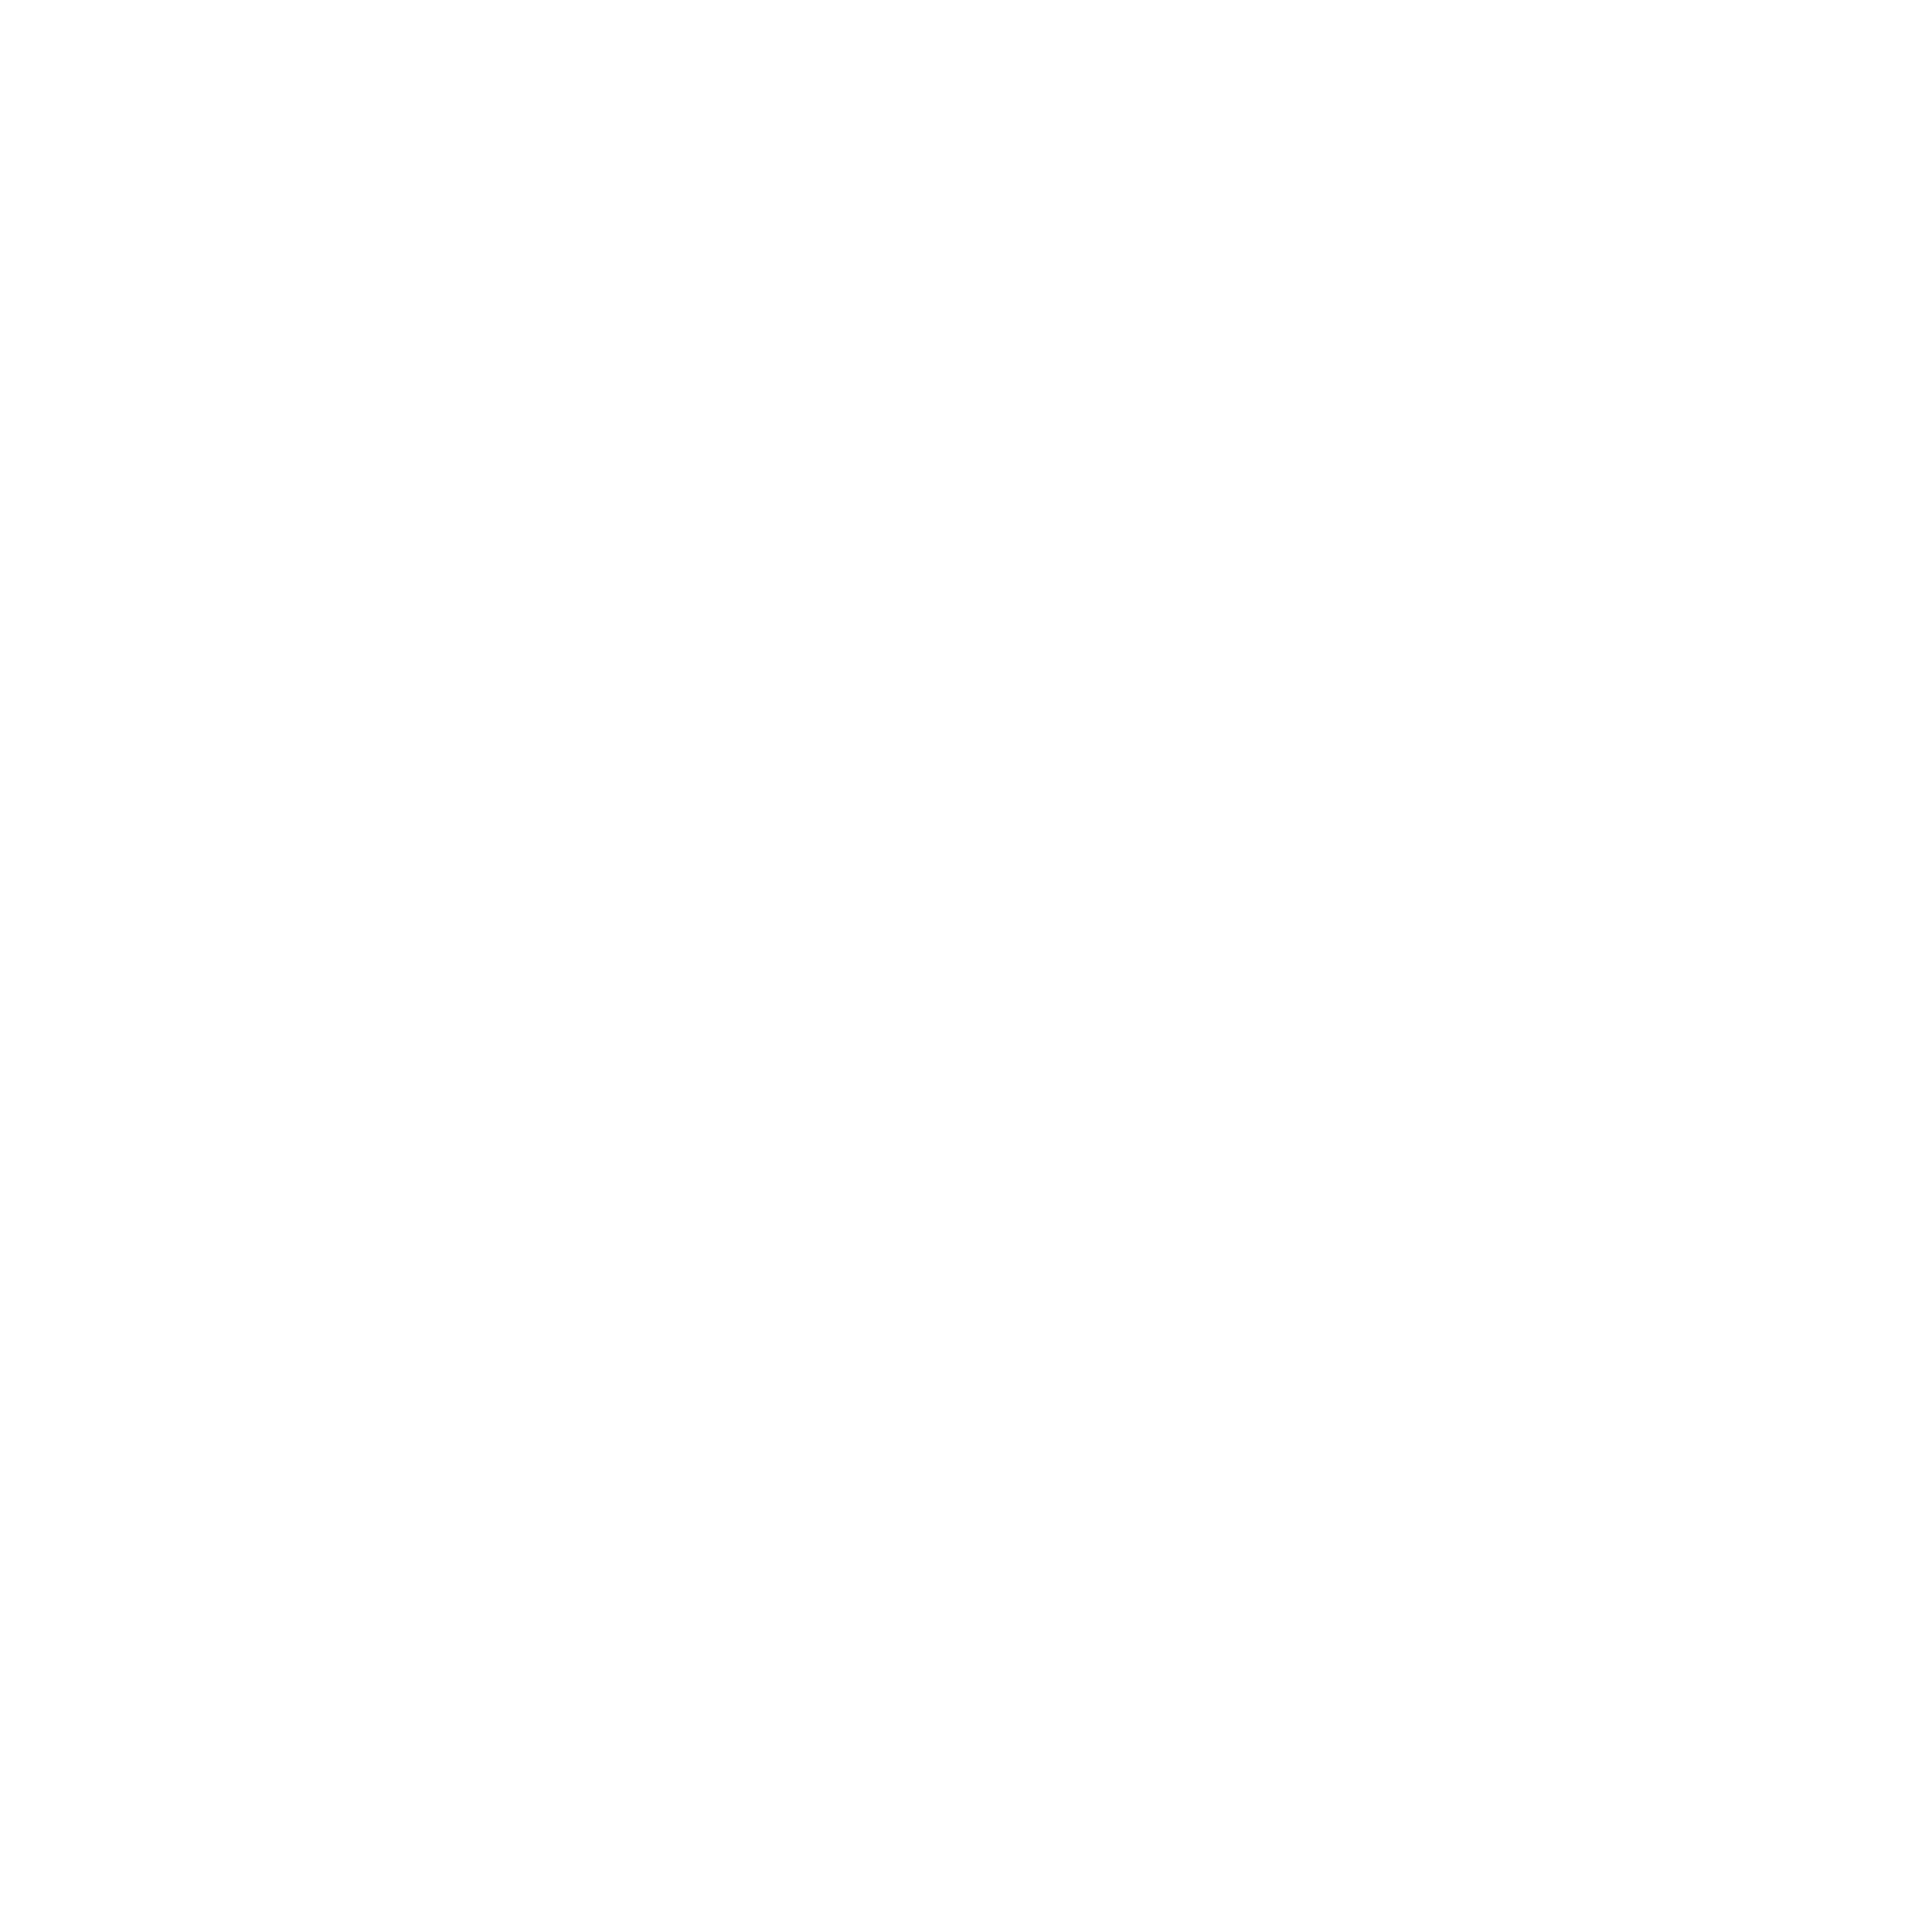 NCSC's CyberFirst